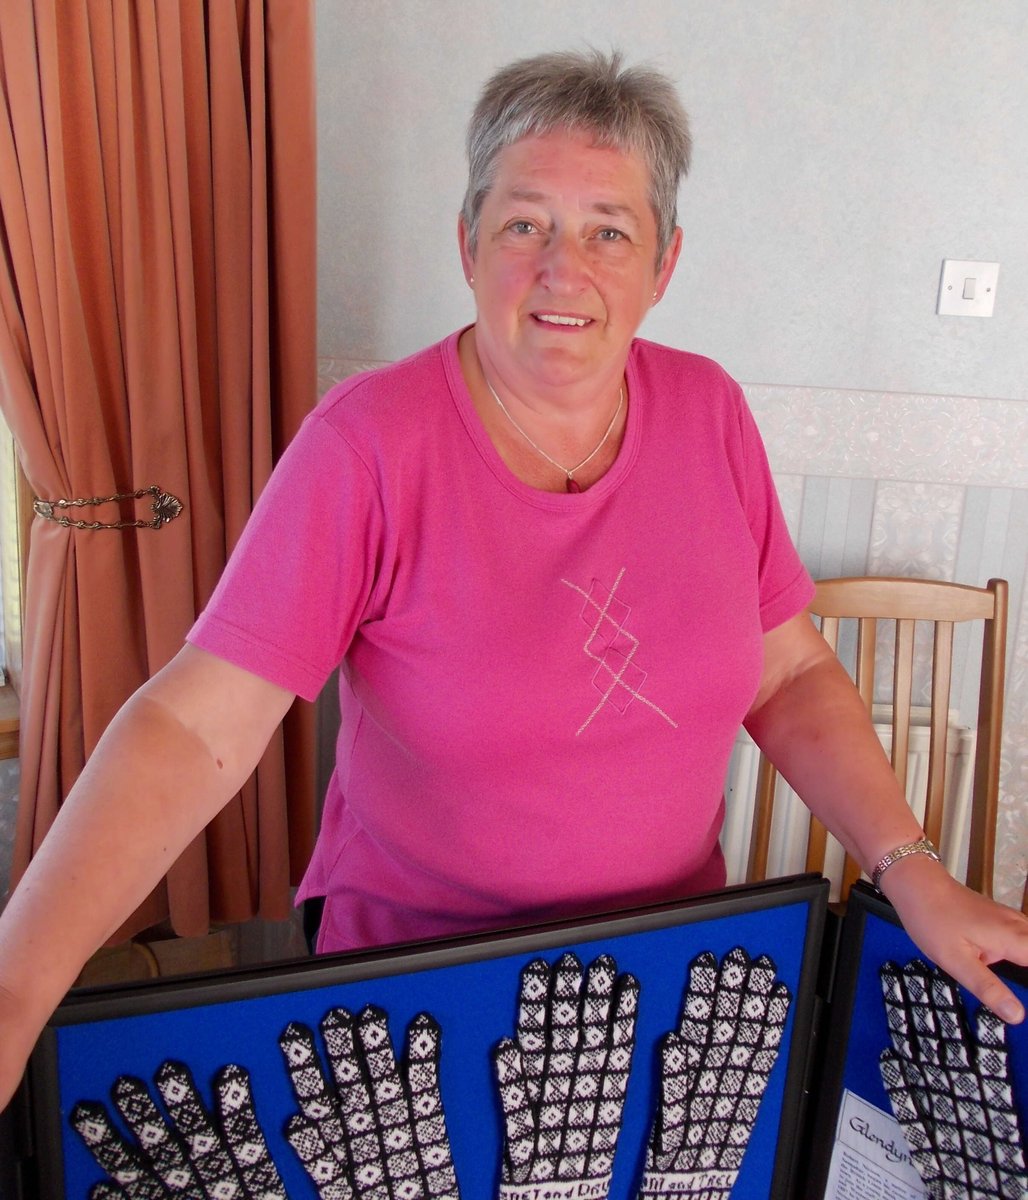 For today's post ahead of our #OnlineExhibition launch, we're sharing an interview with May MacCormack! Appearing in a BBC article, May is an expert on the history of Sanquhar knitting, travelling to America as part of the ‘Smithsonian Folk Life Festival’! edin.ac/3Uy0gIY